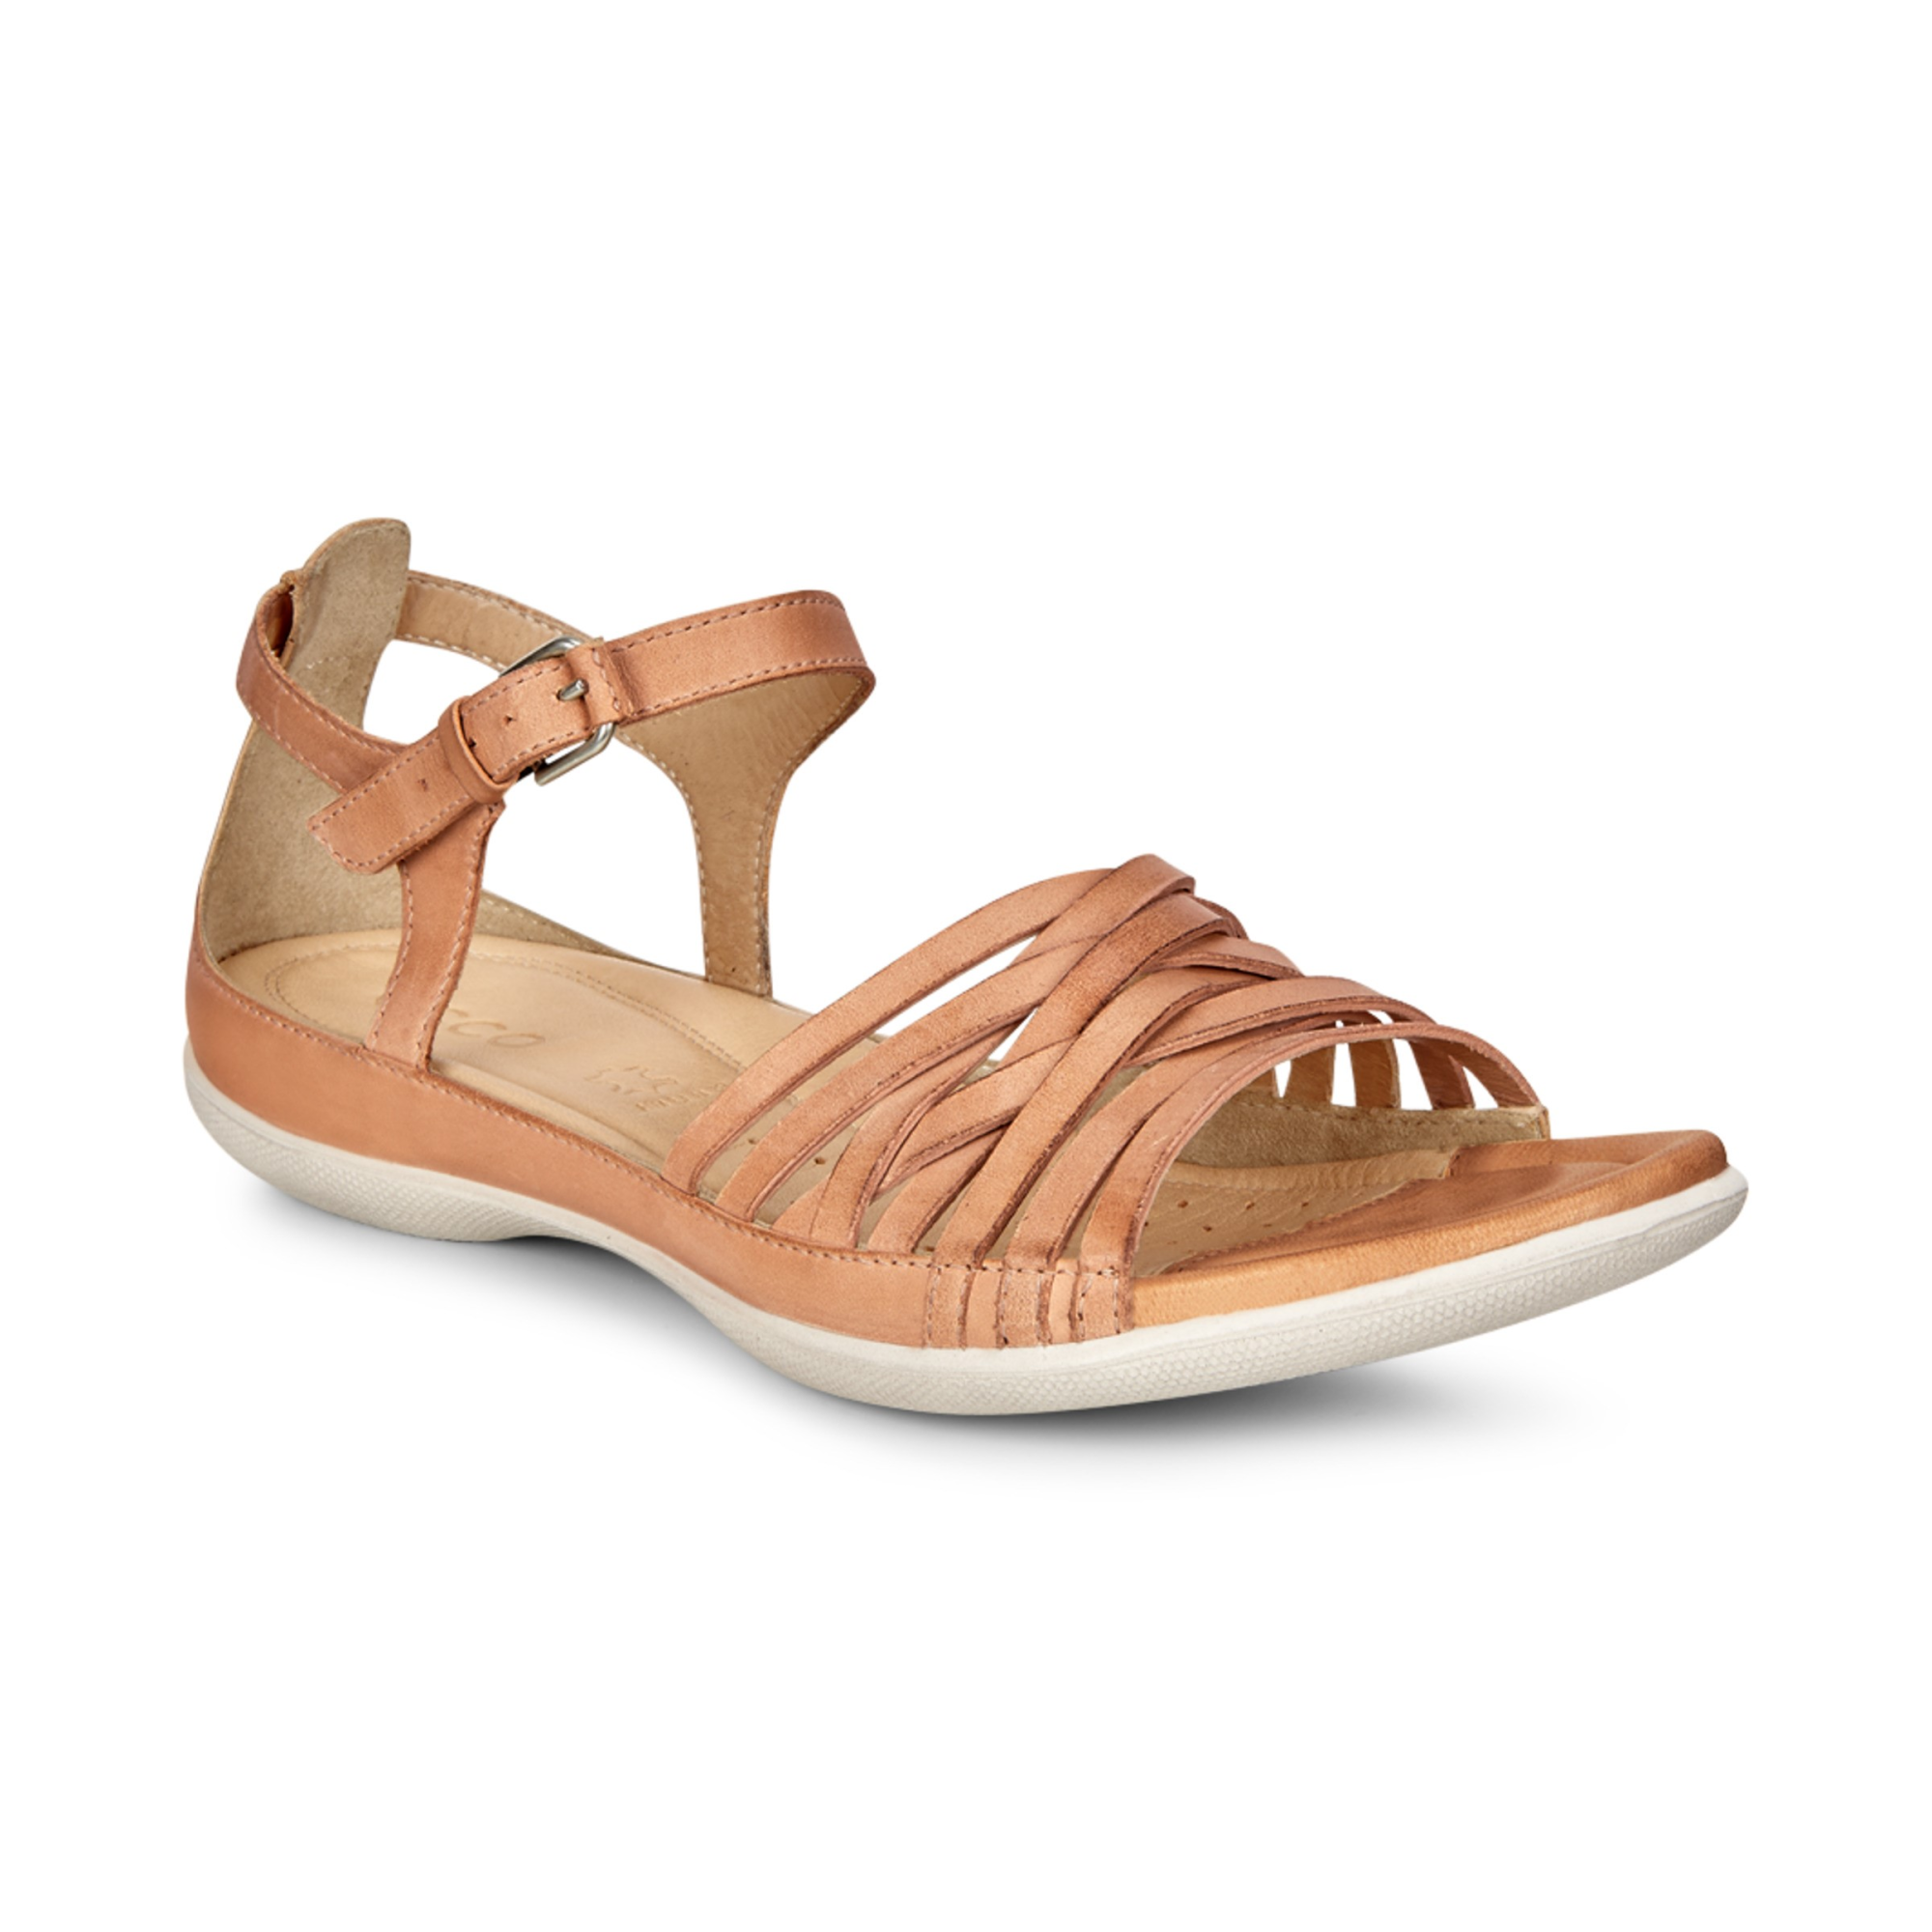 Ecco Lattice Sandal 36 - Products - Veryk Mall - Veryk Mall, product, quick response, safe your